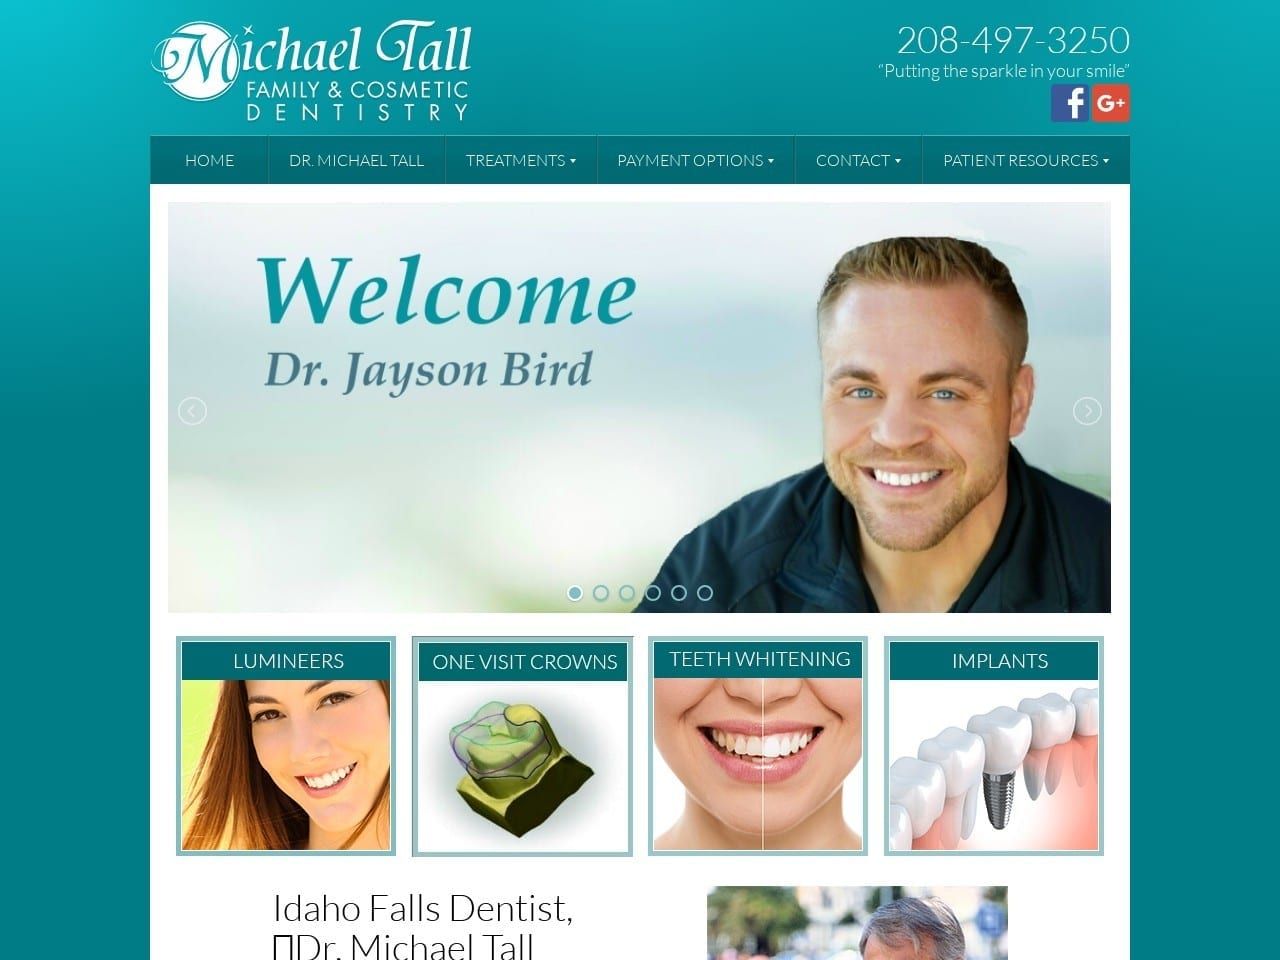 Michael Tall Family & Cosmetic Dentistry Website Screenshot from michaeltalldentistry.com